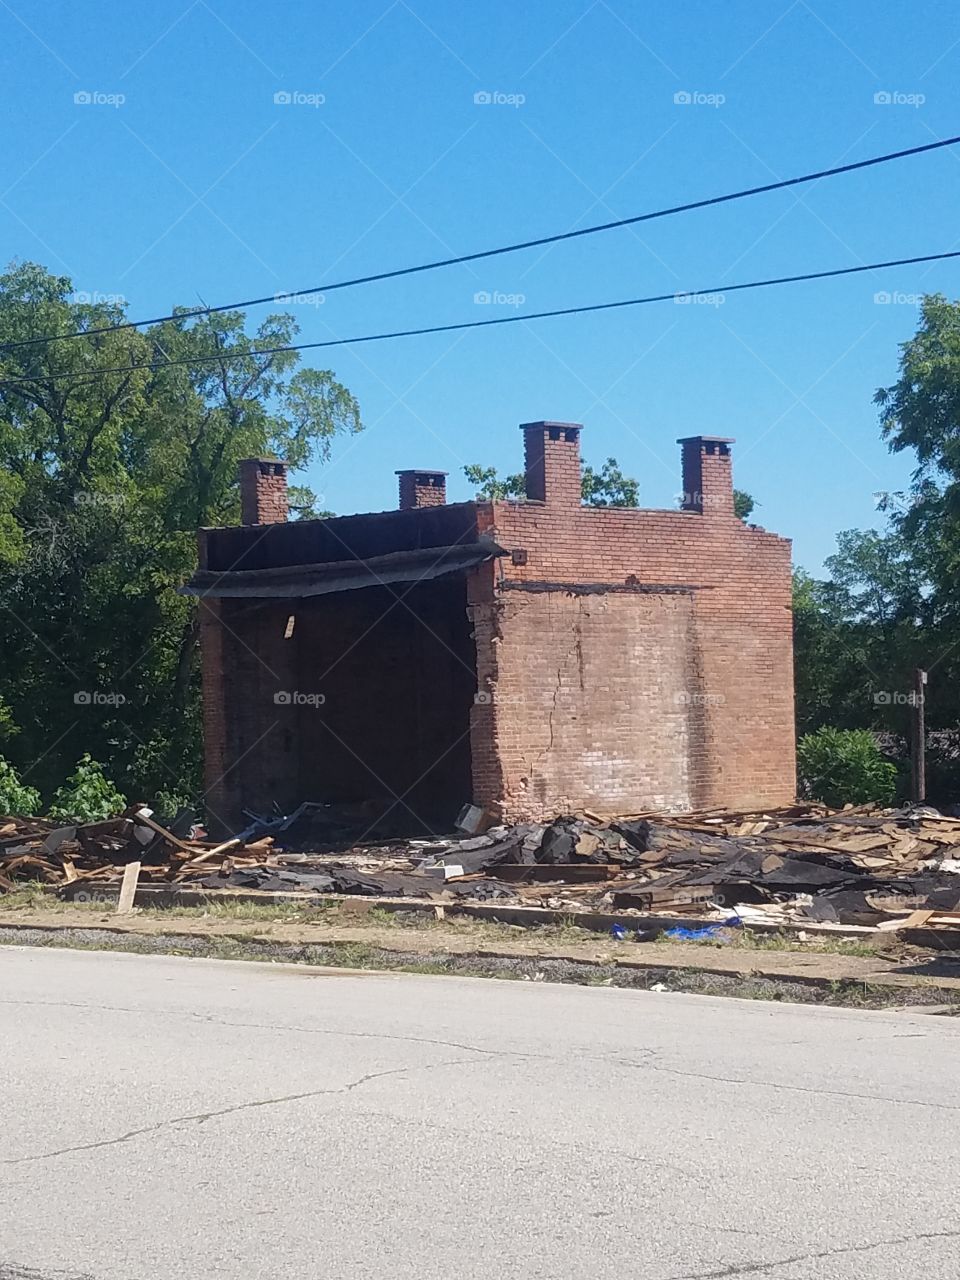 old building being torn down